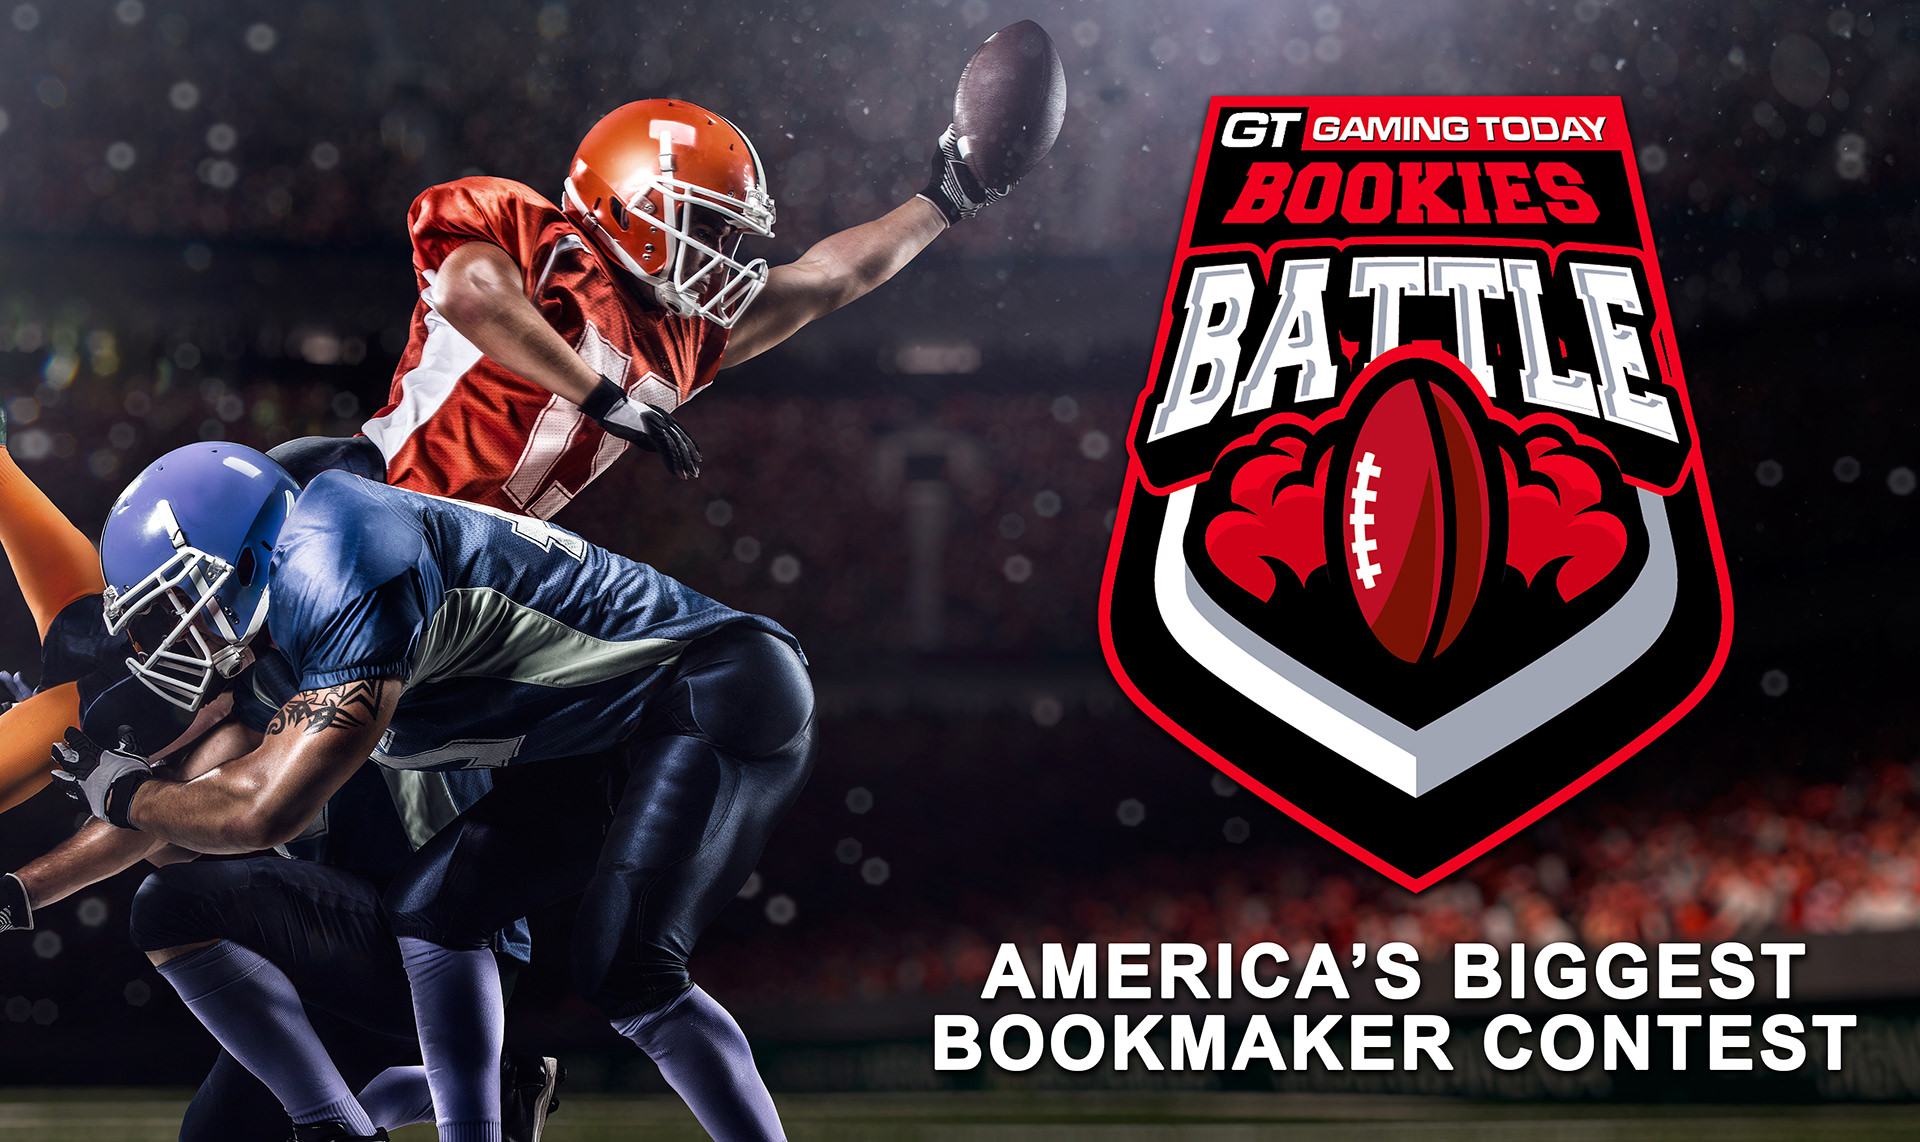 Bookies Battle will include a record 94 sportsbook directors competing for a $1,500 prize and bragging rights.